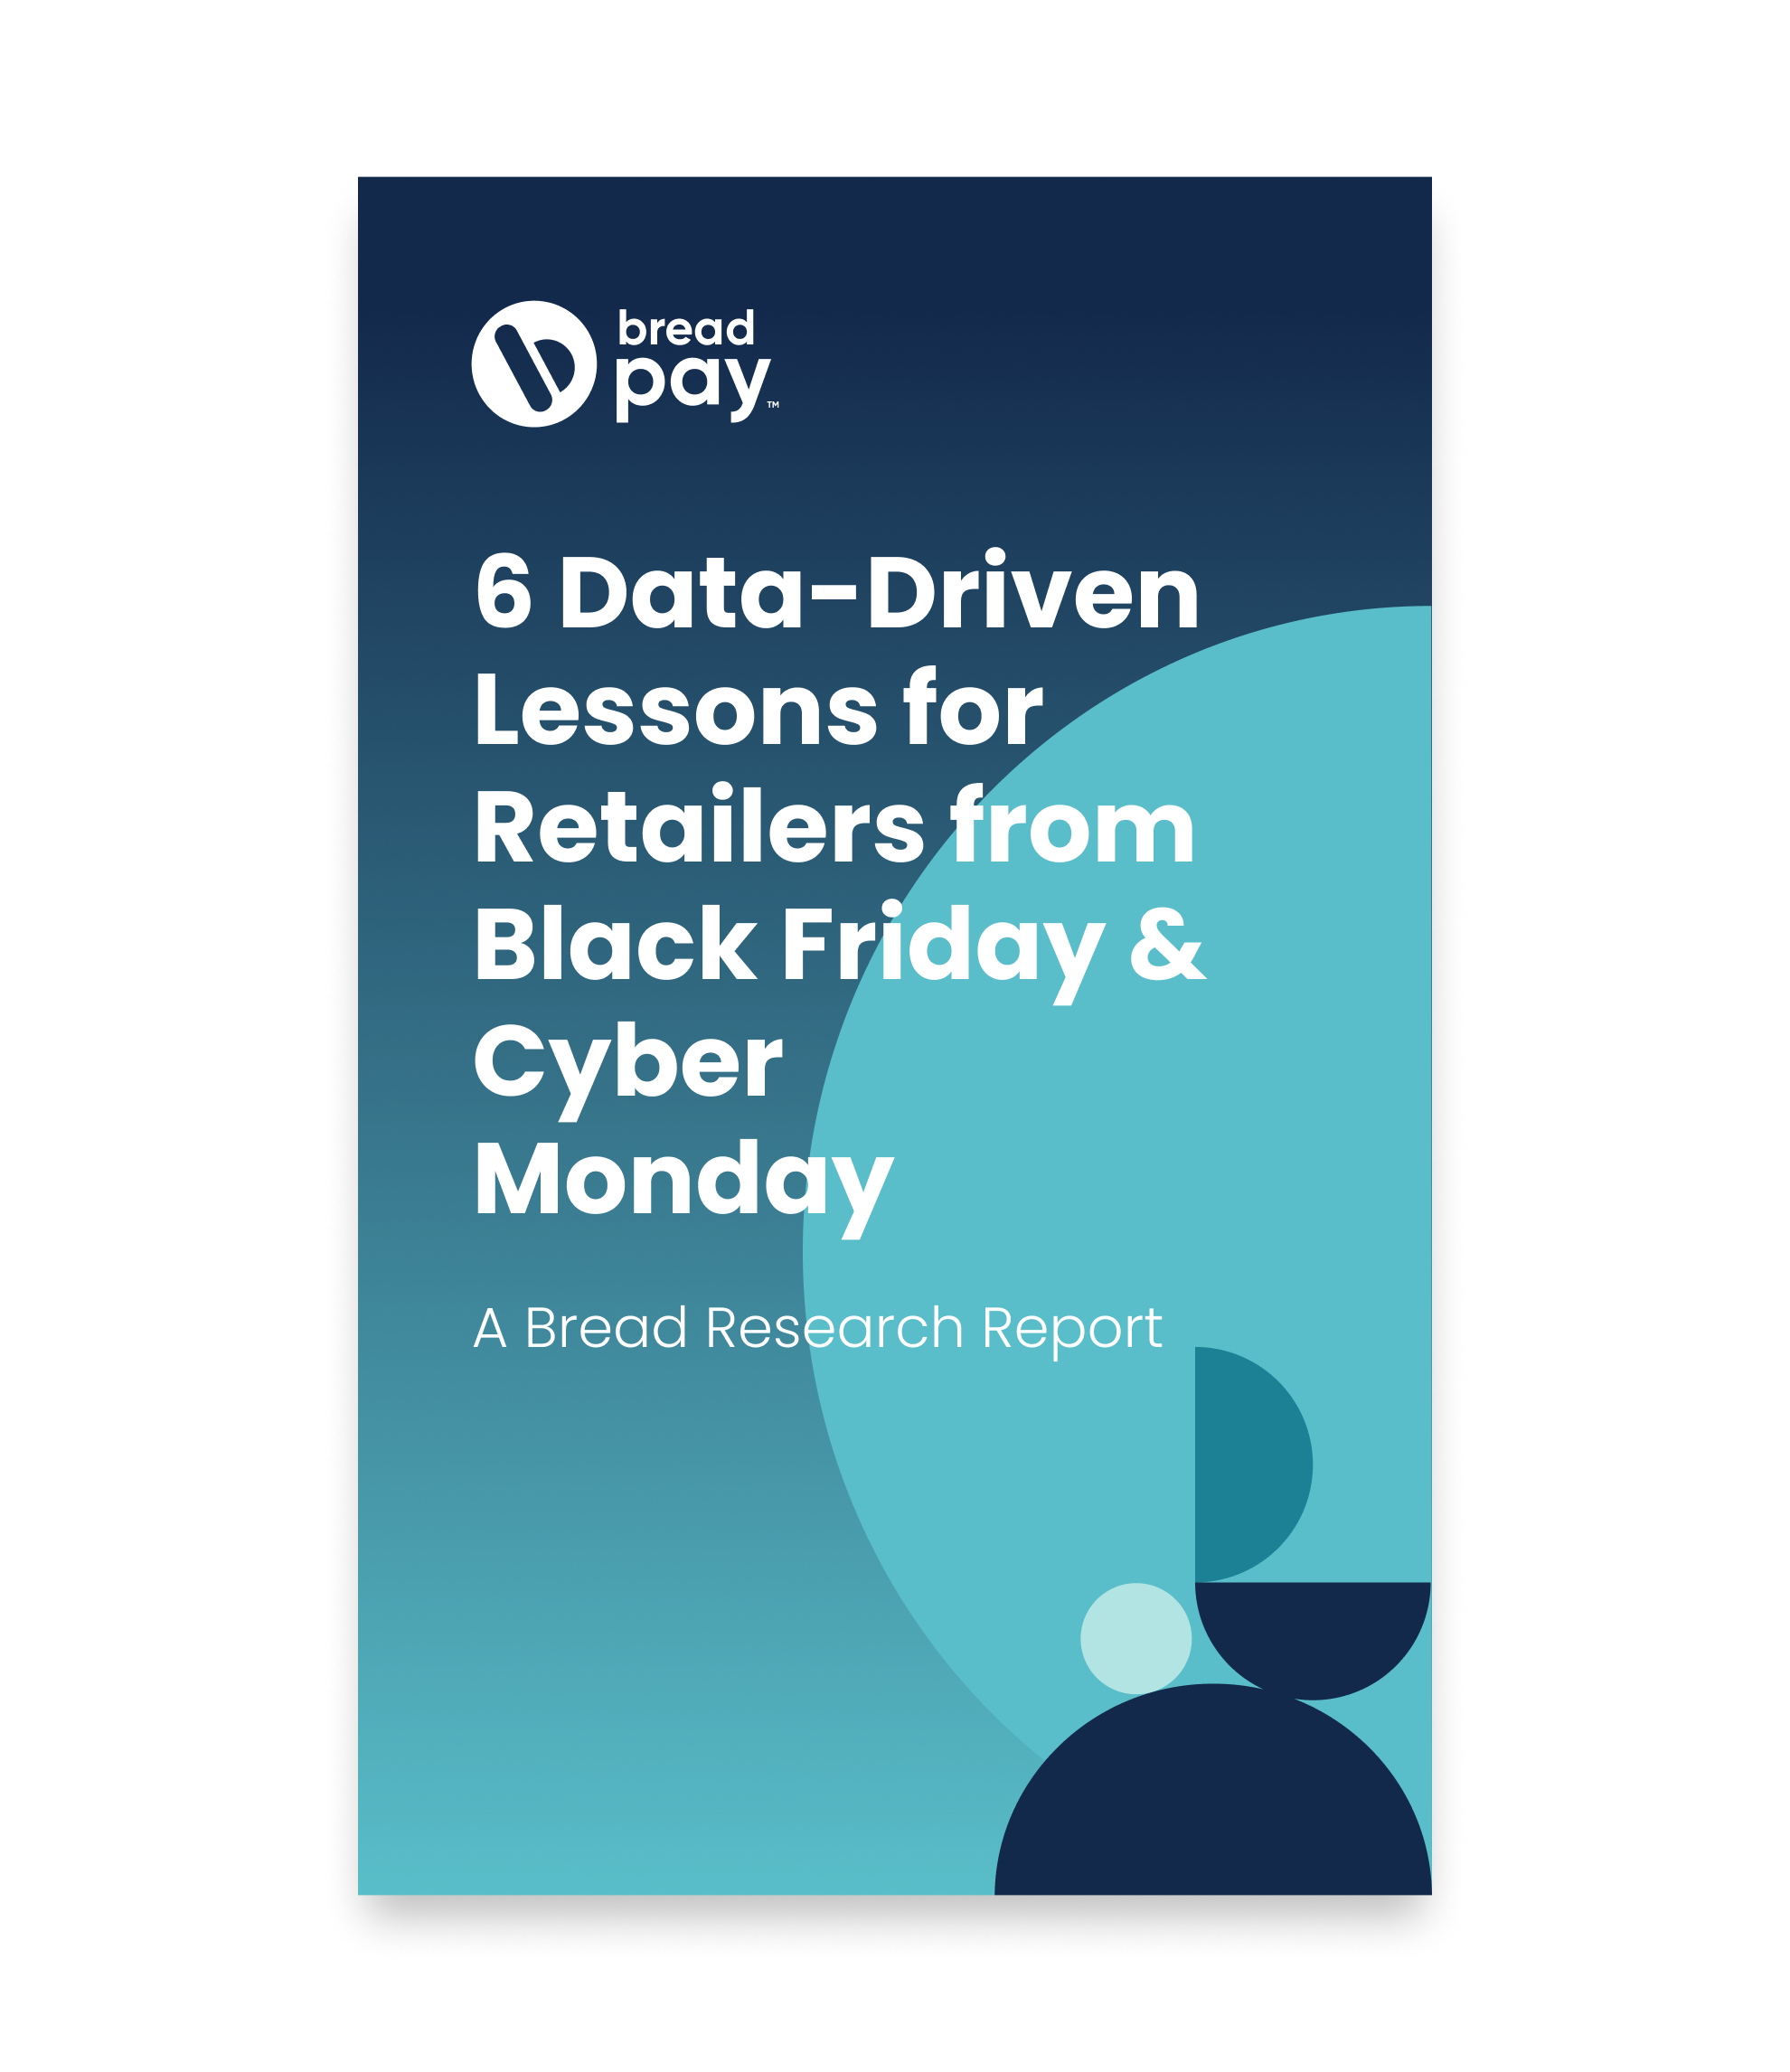 6 Data-Driven Lessons for Retailers from Black Friday & Cyber Monday